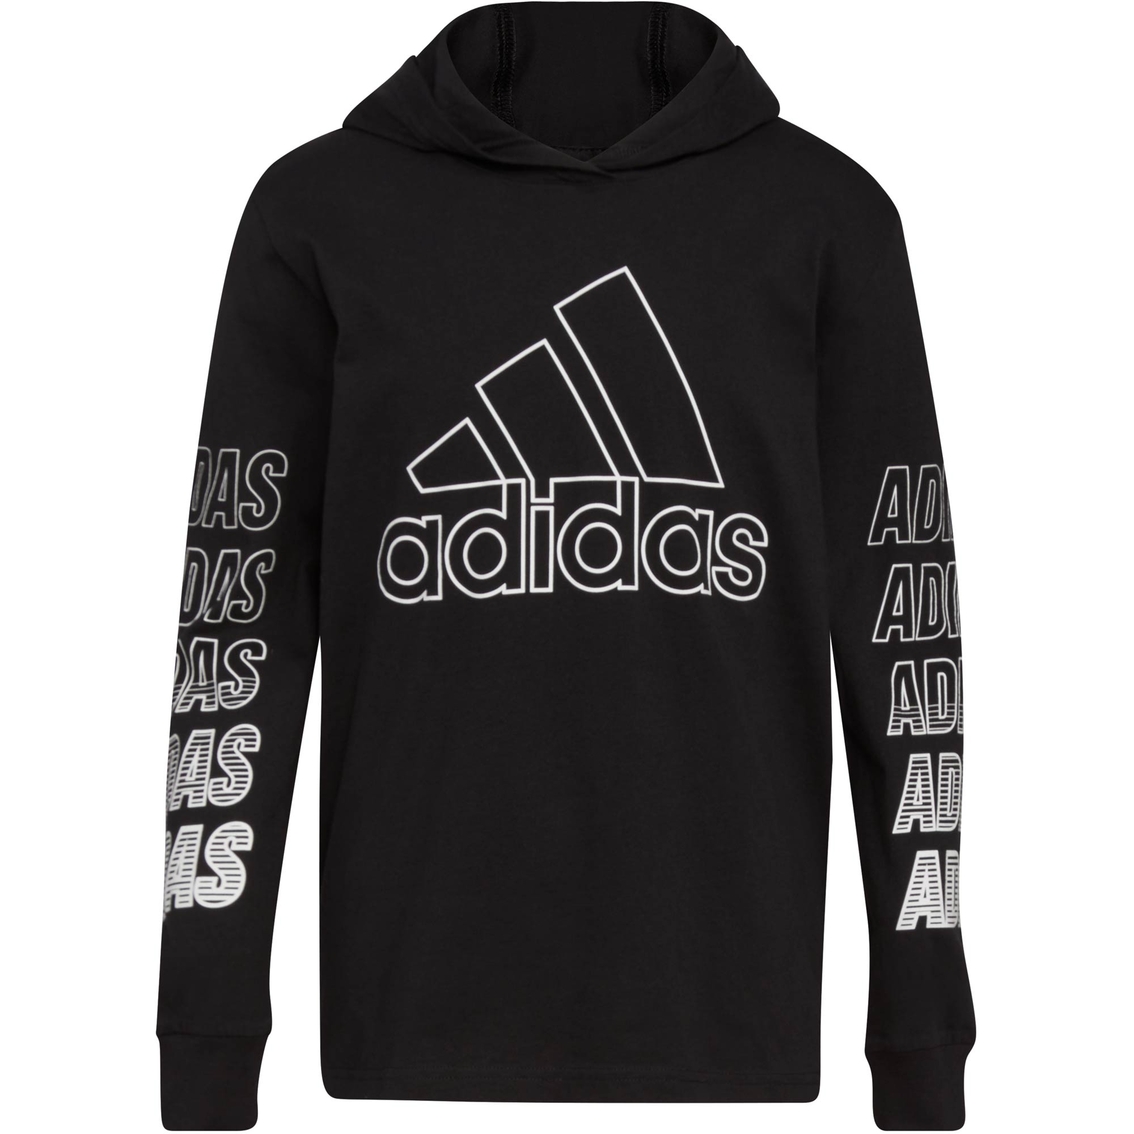 Adidas Toddler Boys Fast Hooded Tee - Image 5 of 7